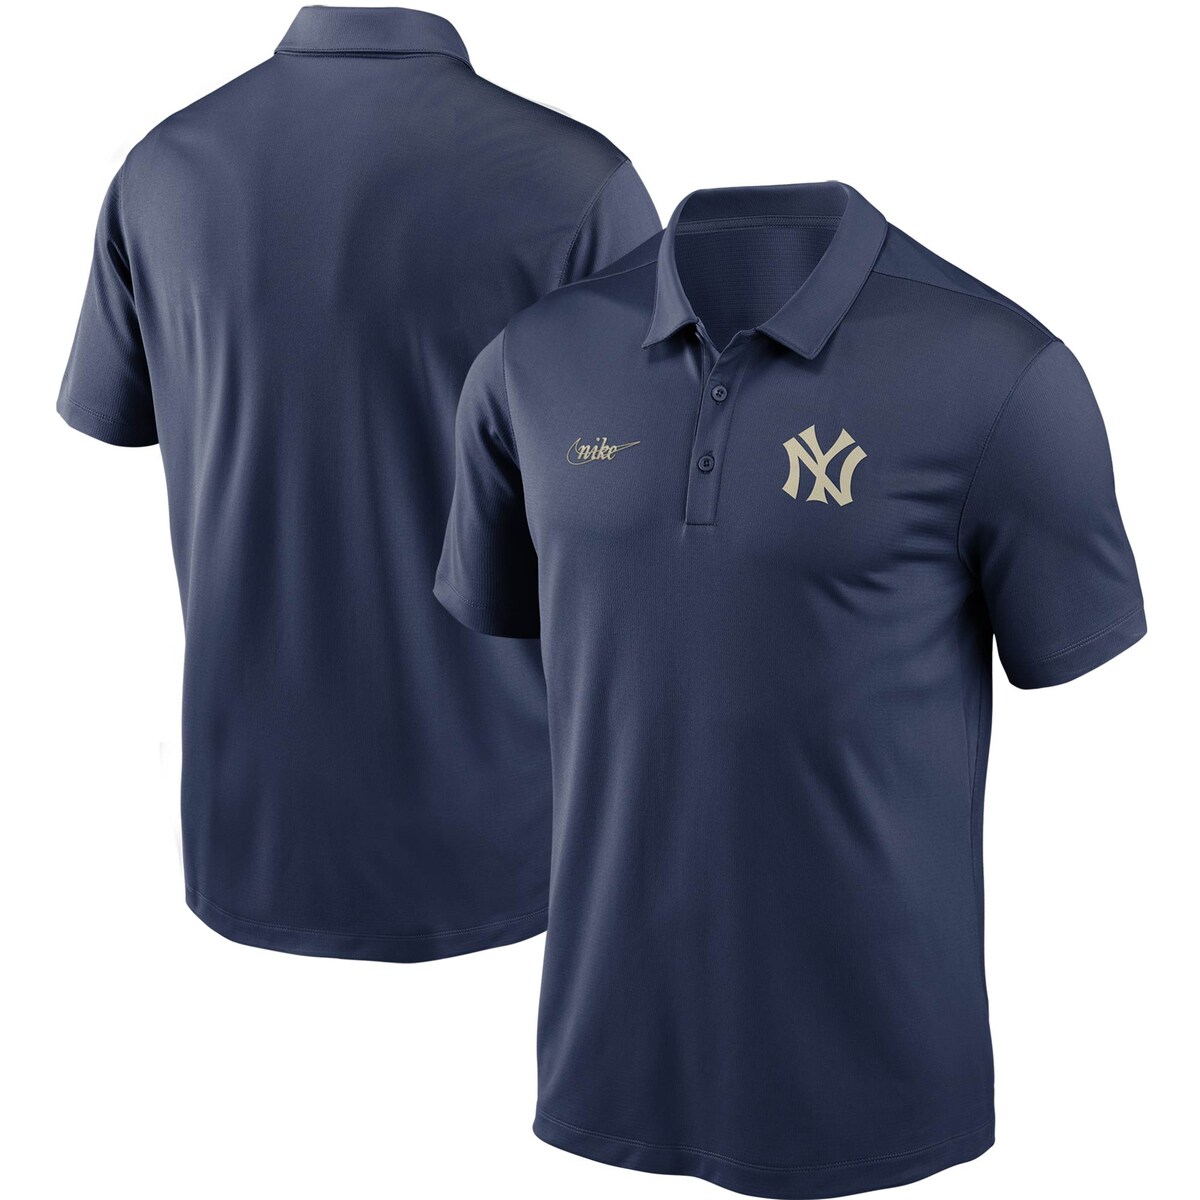 MLB L[X |Vc Nike iCL Y lCr[ (Men's Nike Cooperstown Logo Franchise Polo)